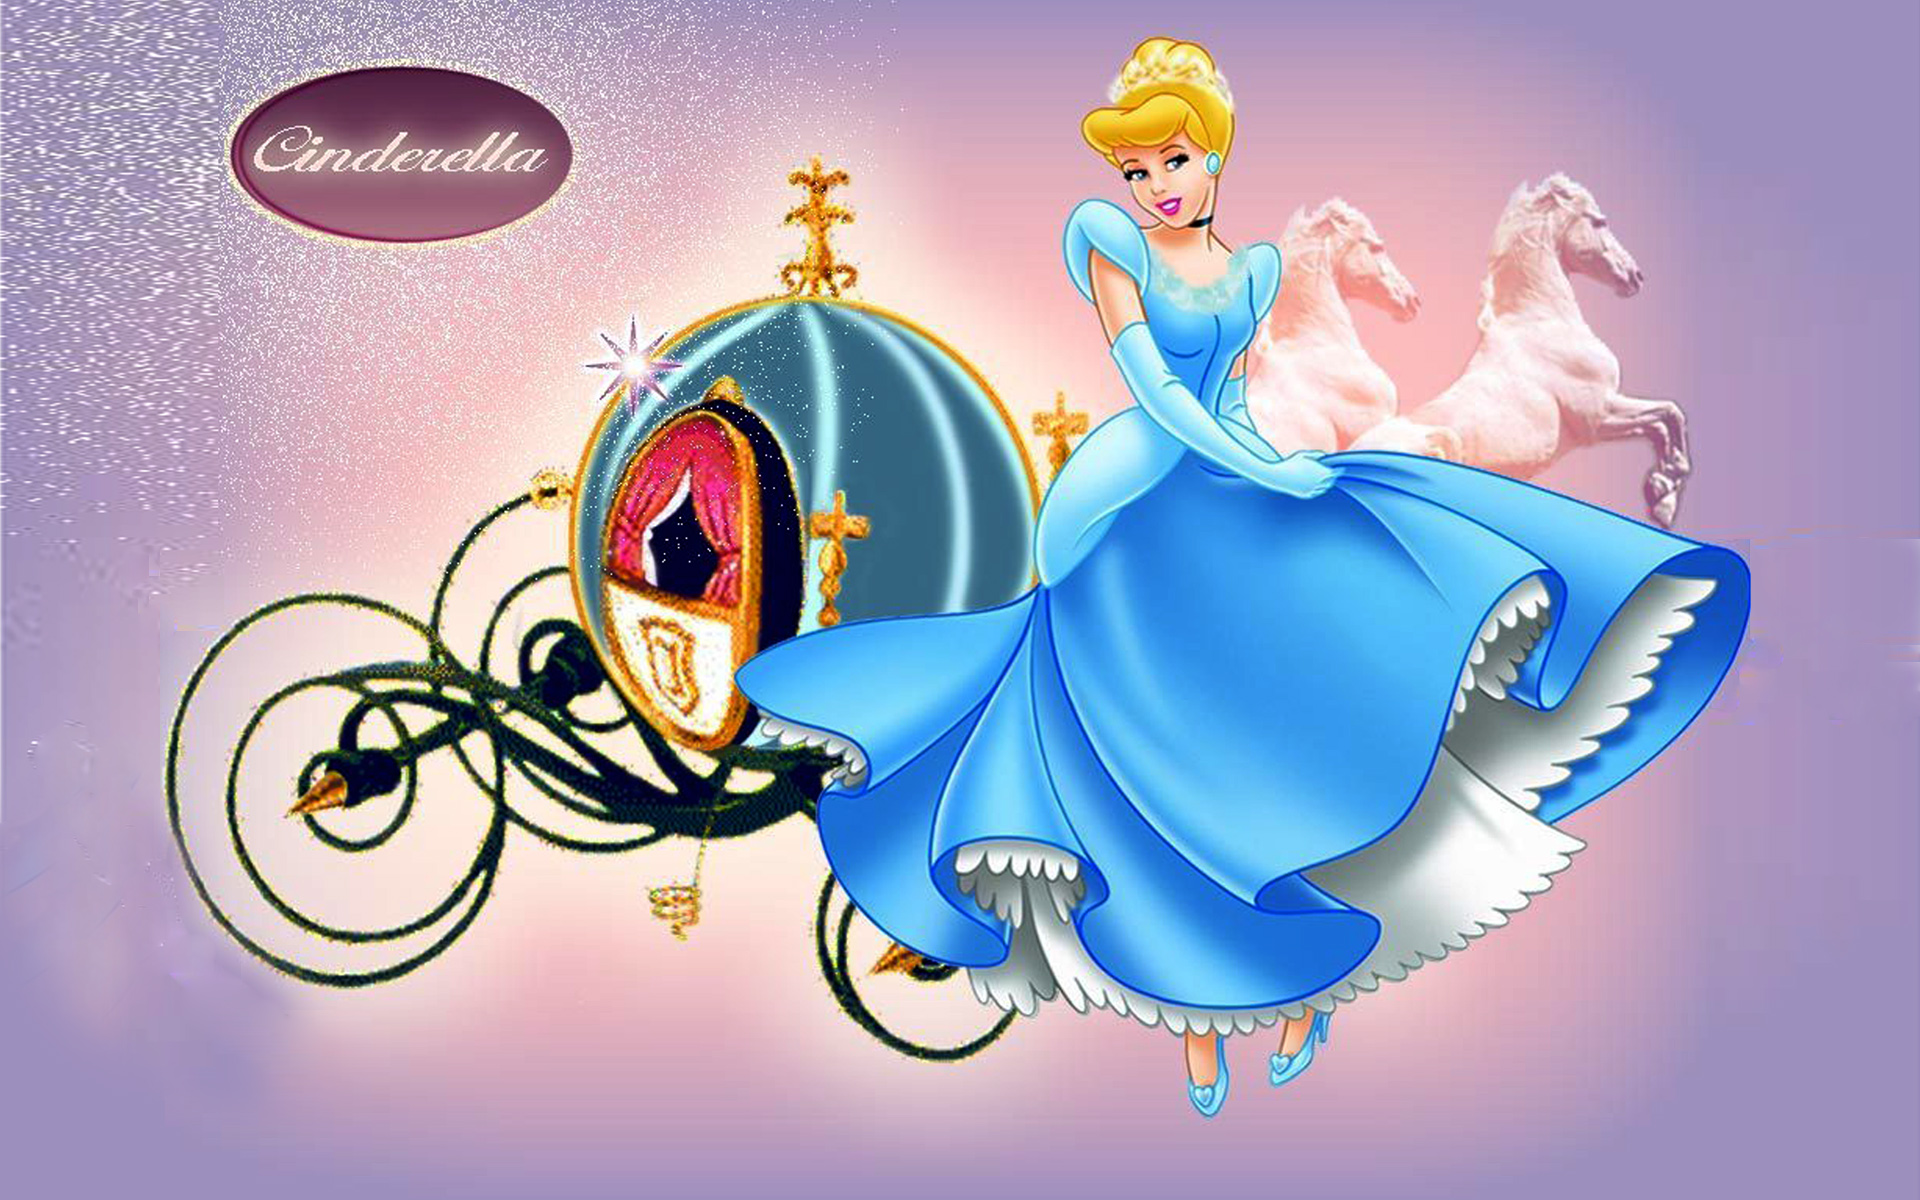 Cinderella Love Story Cartoon Hd Wallpaper For Pc Tablet And Mobile